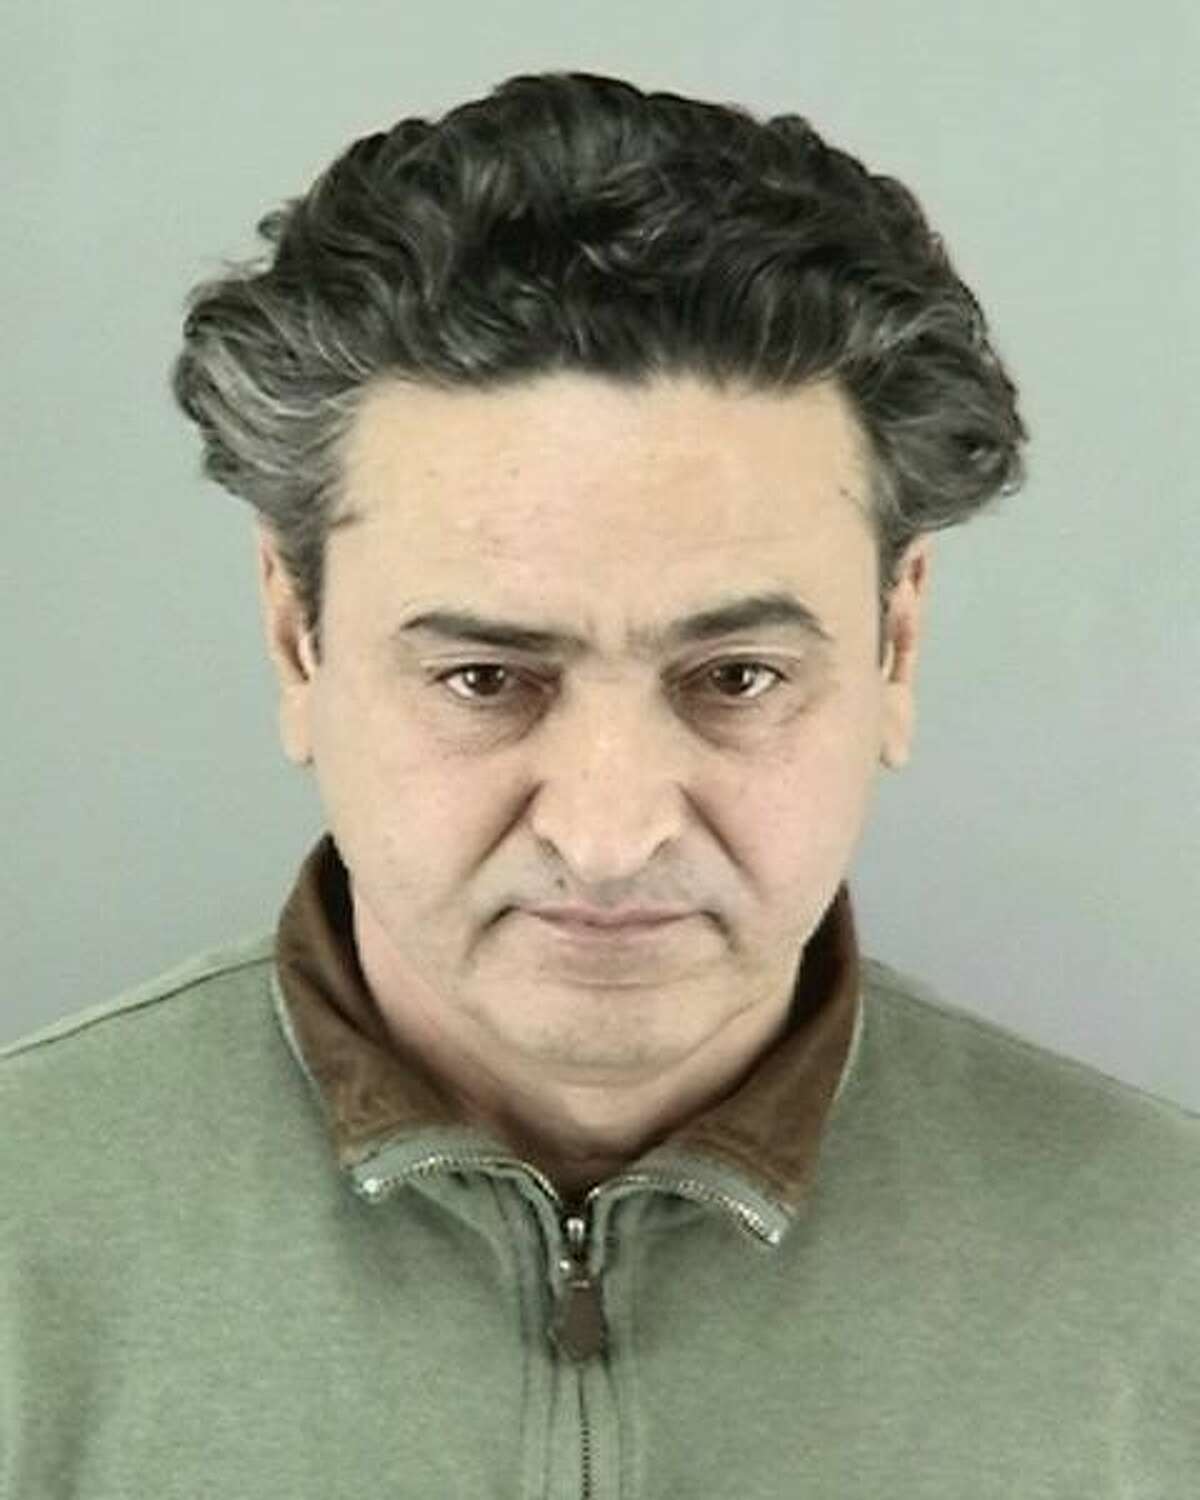 Syed Muzaffar, 57, of Union City was charged Monday with misdemeanor vehicular manslaughter in connection with a crash in San Francisco that killed a 6-year-old girl.